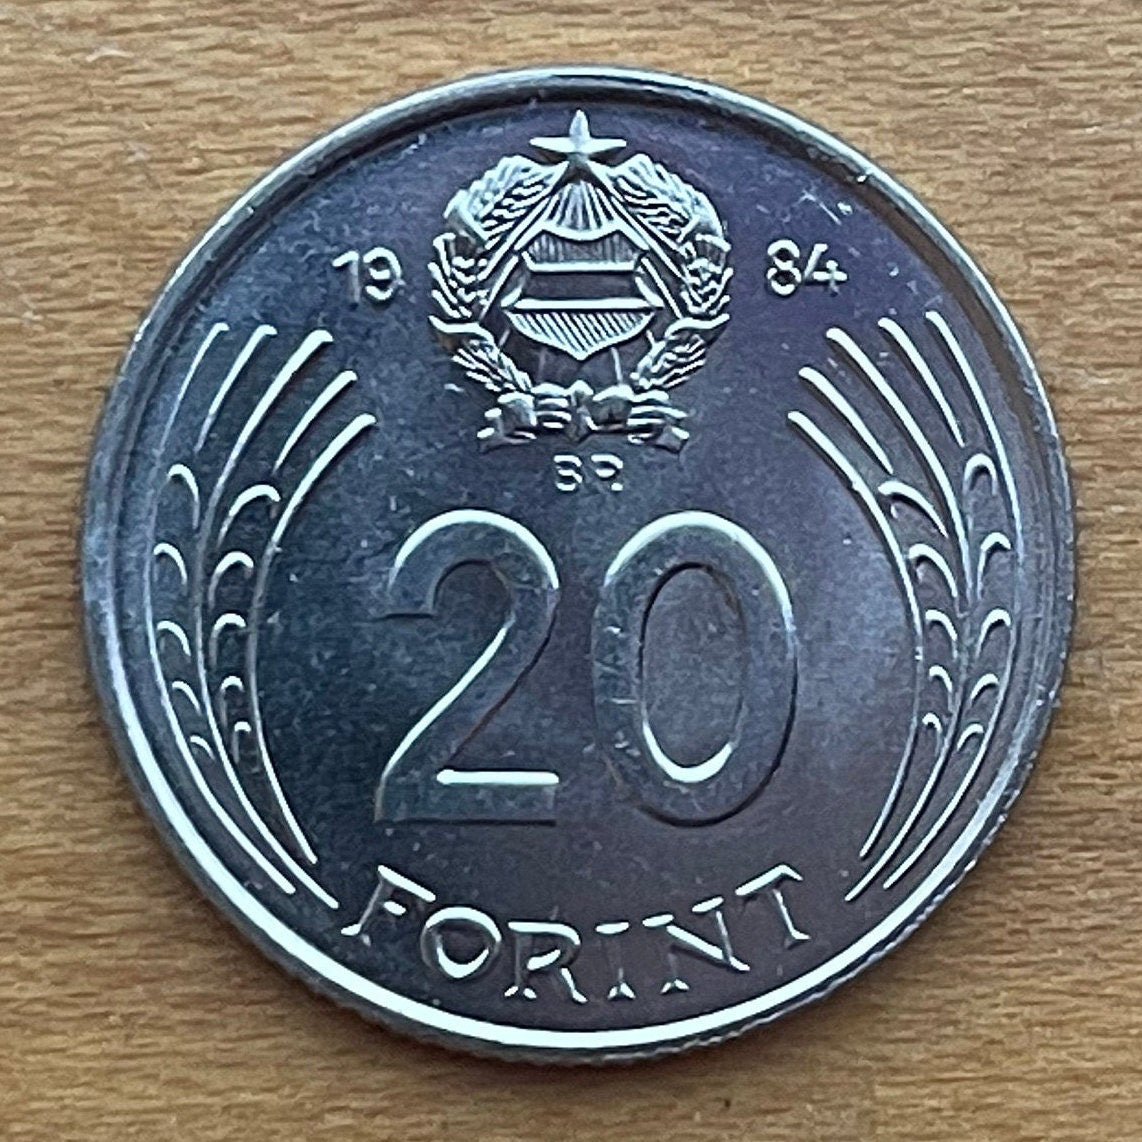 György Dózsa Freedom Martyr 20 Forint Hungary Authentic Coin Money for Jewelry (Peasant's Revolt) (Szekely) (Revolution) (Rebel)